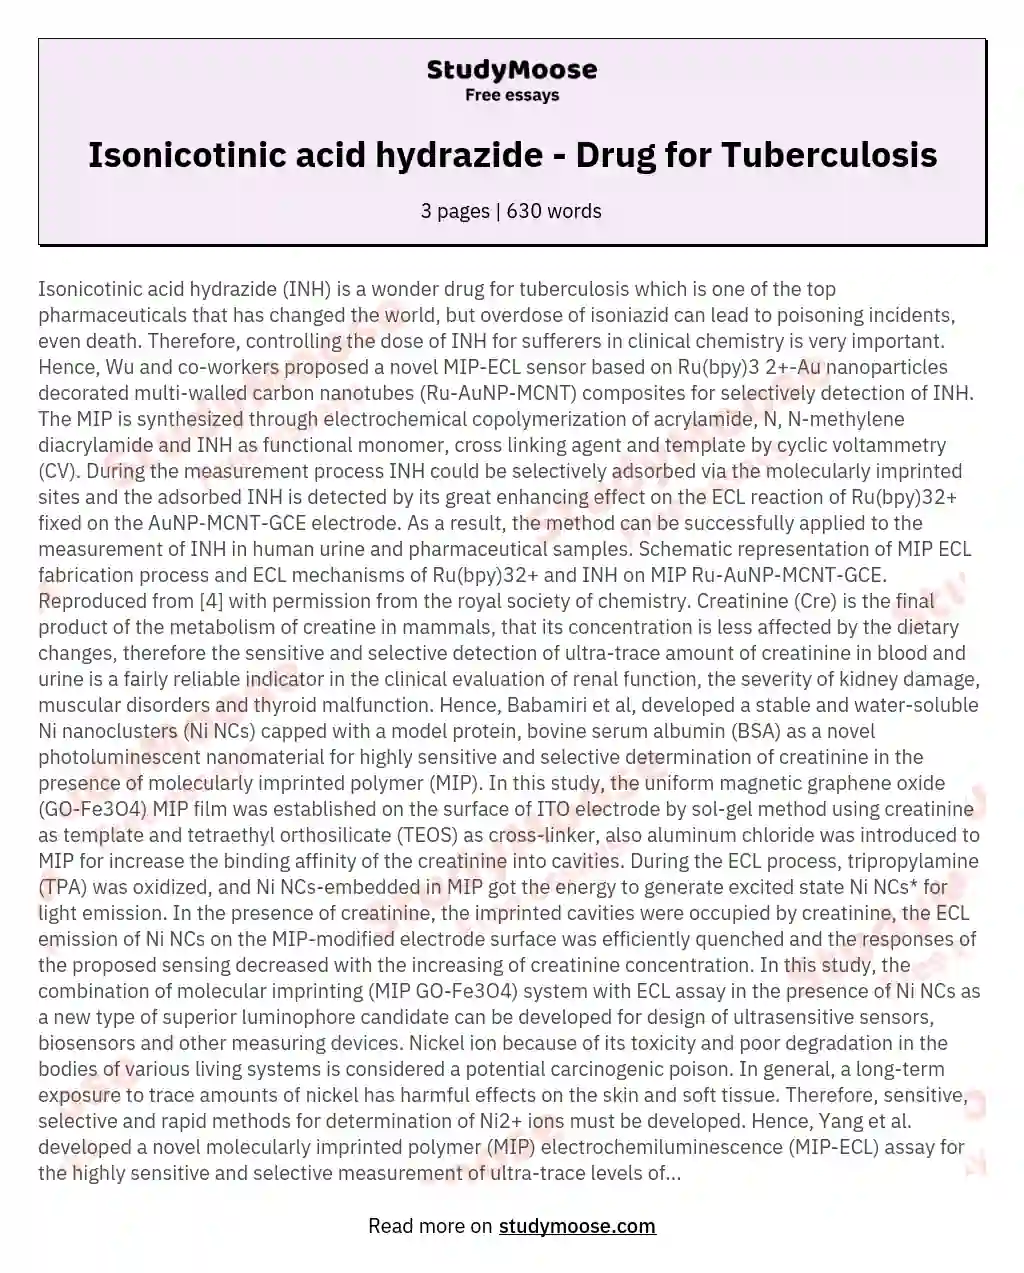 Isonicotinic acid hydrazide - Drug for Tuberculosis essay